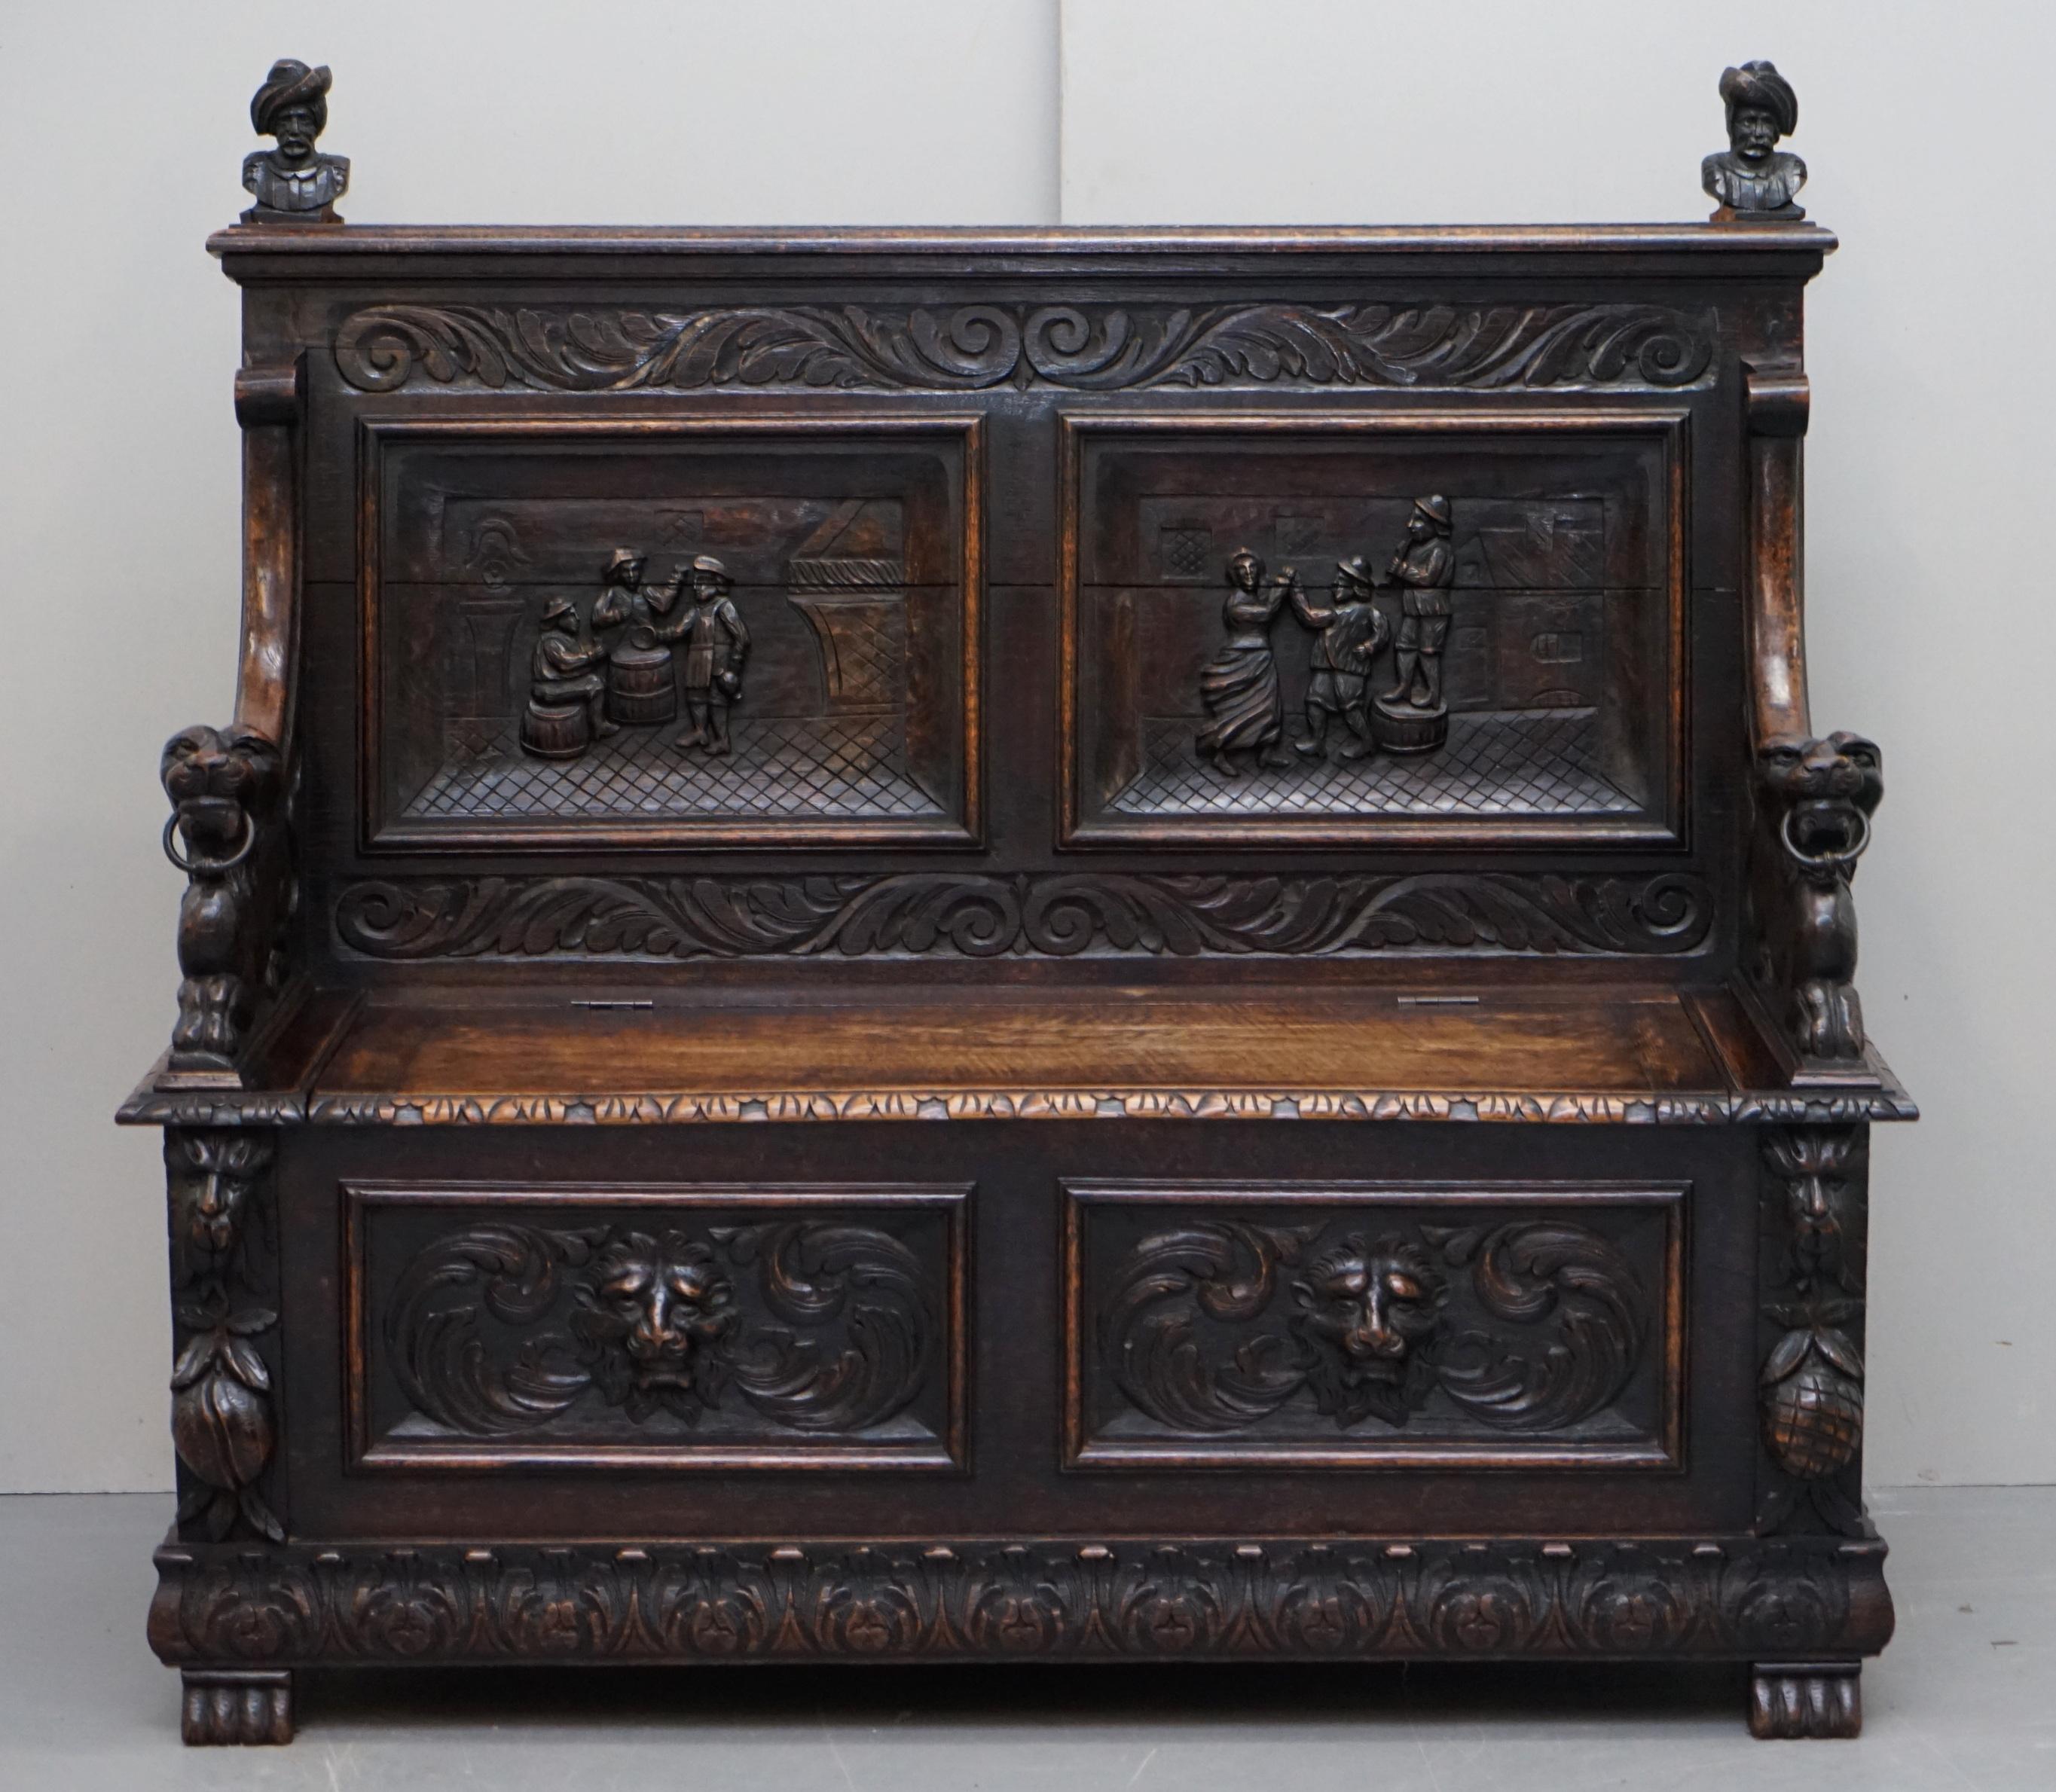 Wev are delighted to offer for sale this lovely hand carved early Victorian oak settle bench with Lion arms and internal storage

A well made and decorative hall bench, it’s a real tour de force of carving, just look at it from any angle and you